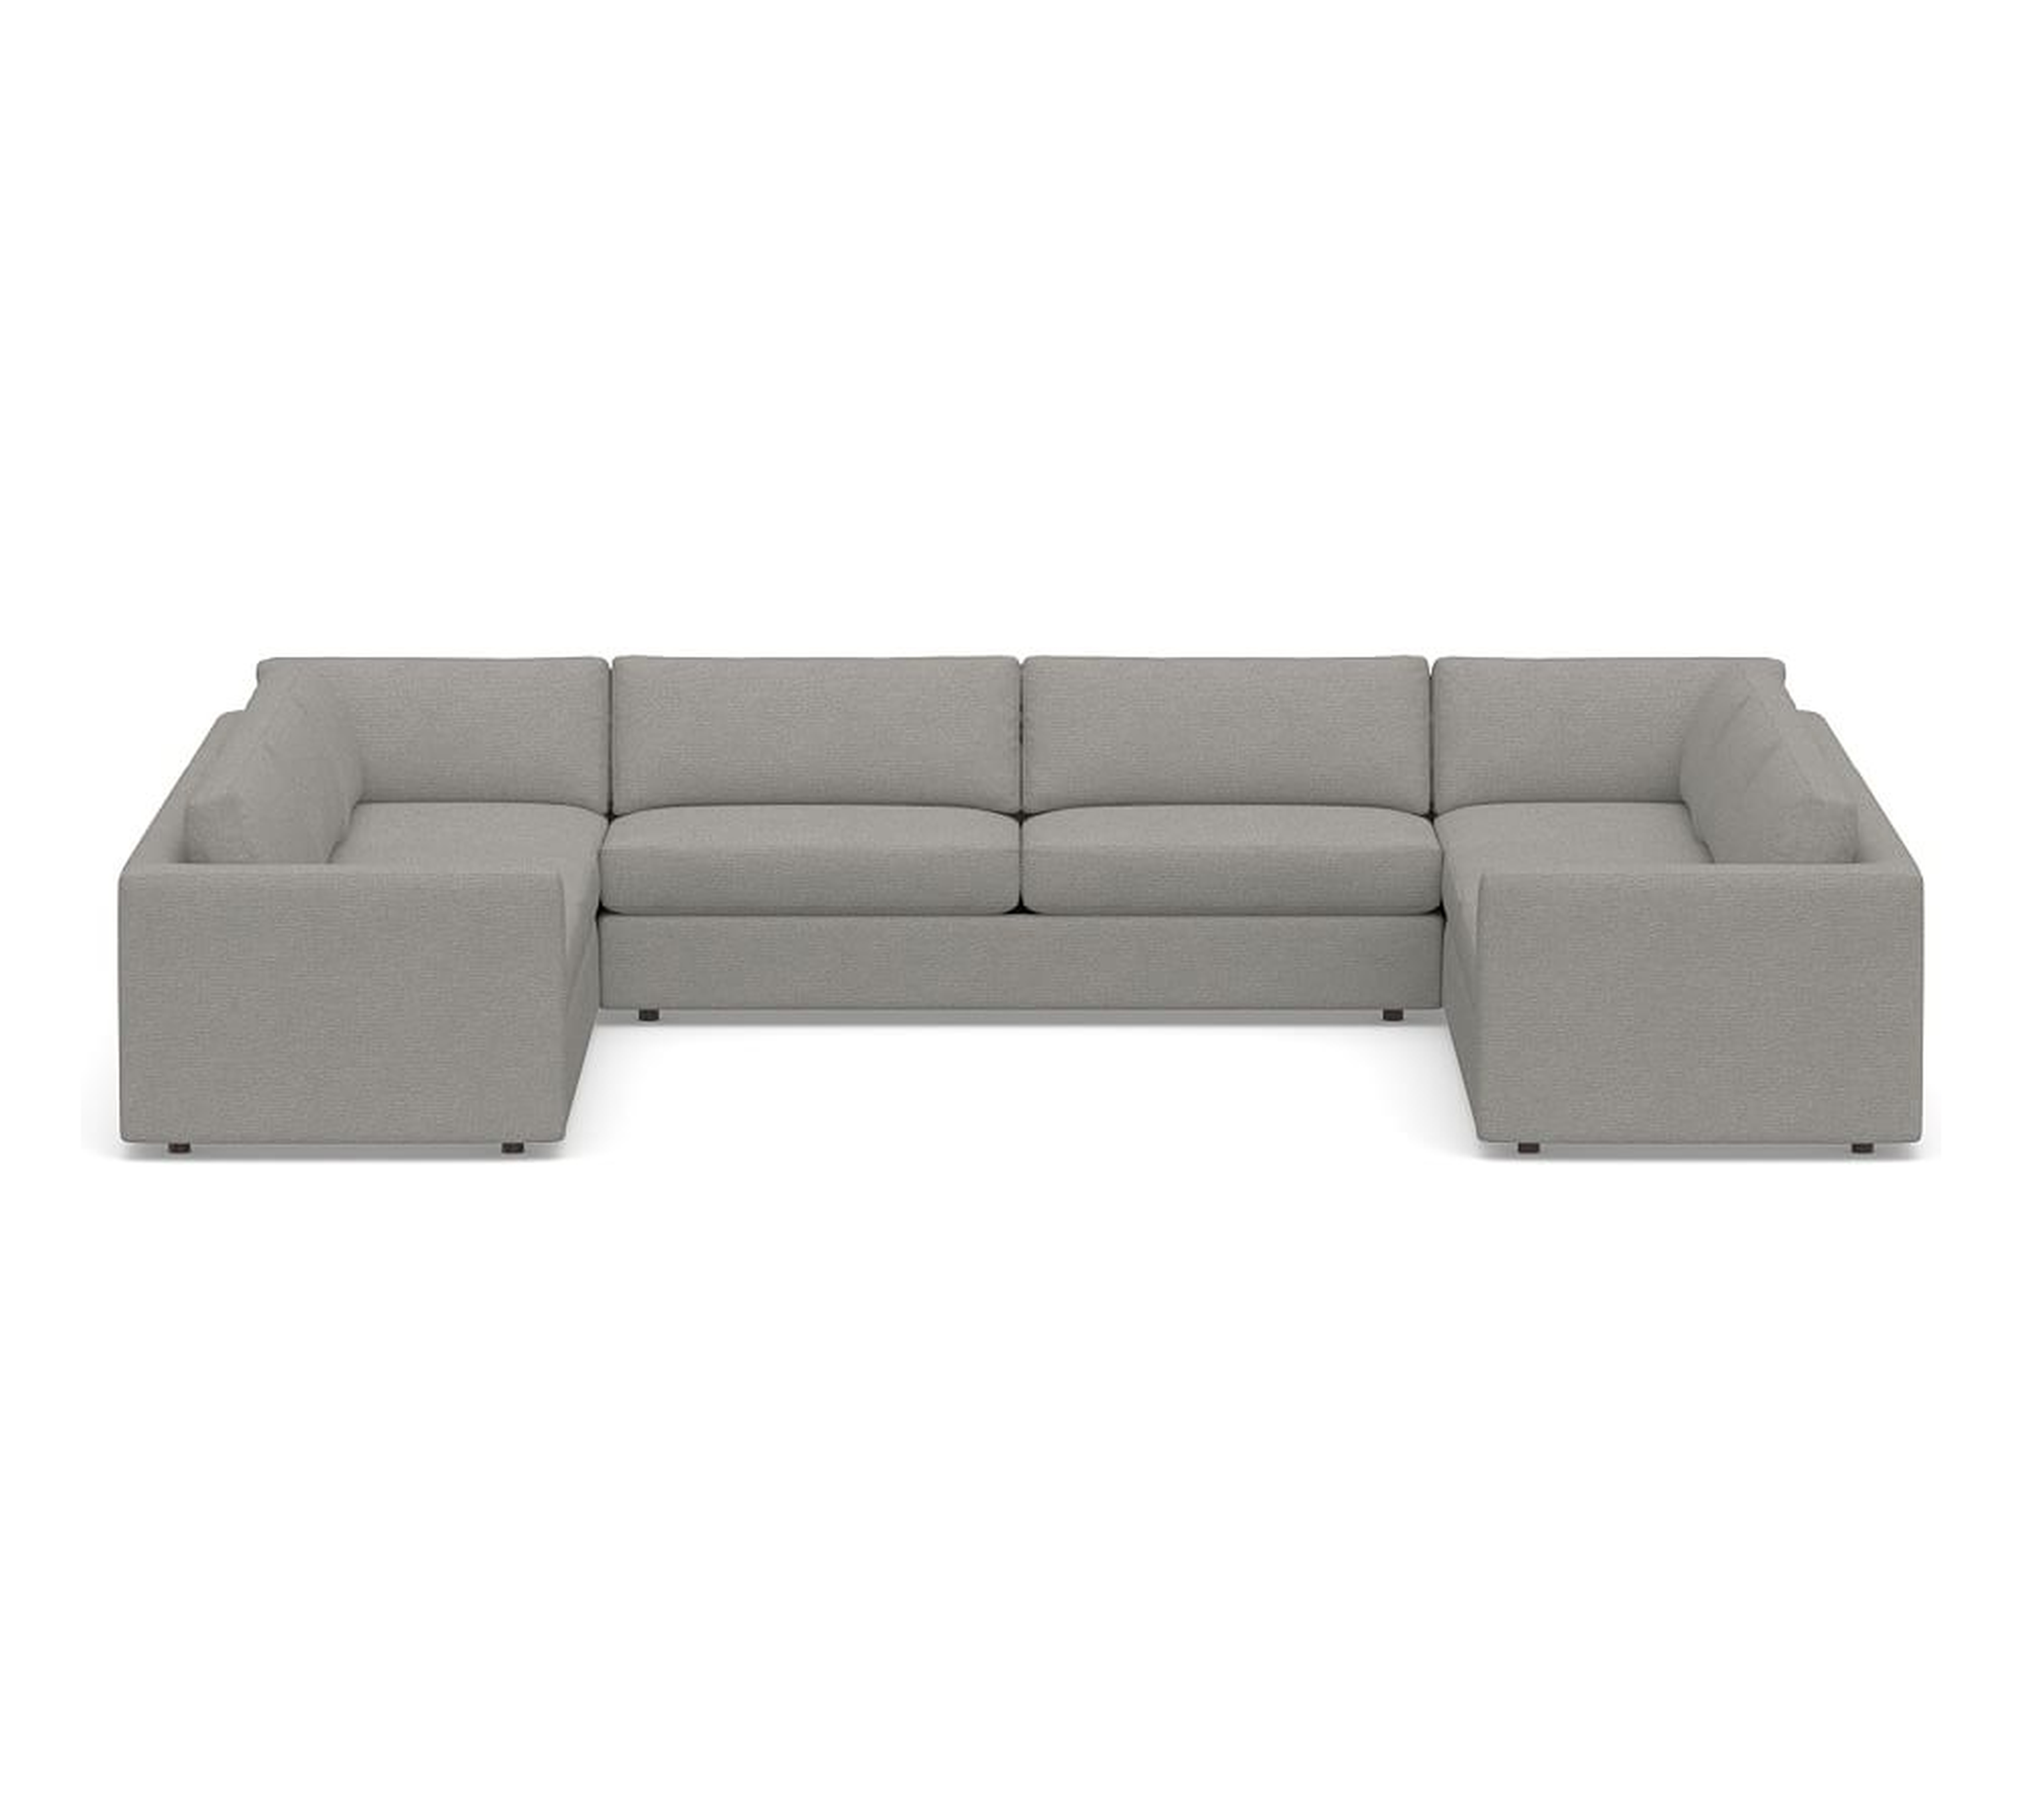 Carmel Square Slim Arm Upholstered U-Sofa Sectional, Down Blend Wrapped Cushions, Performance Heathered Basketweave Platinum - Pottery Barn